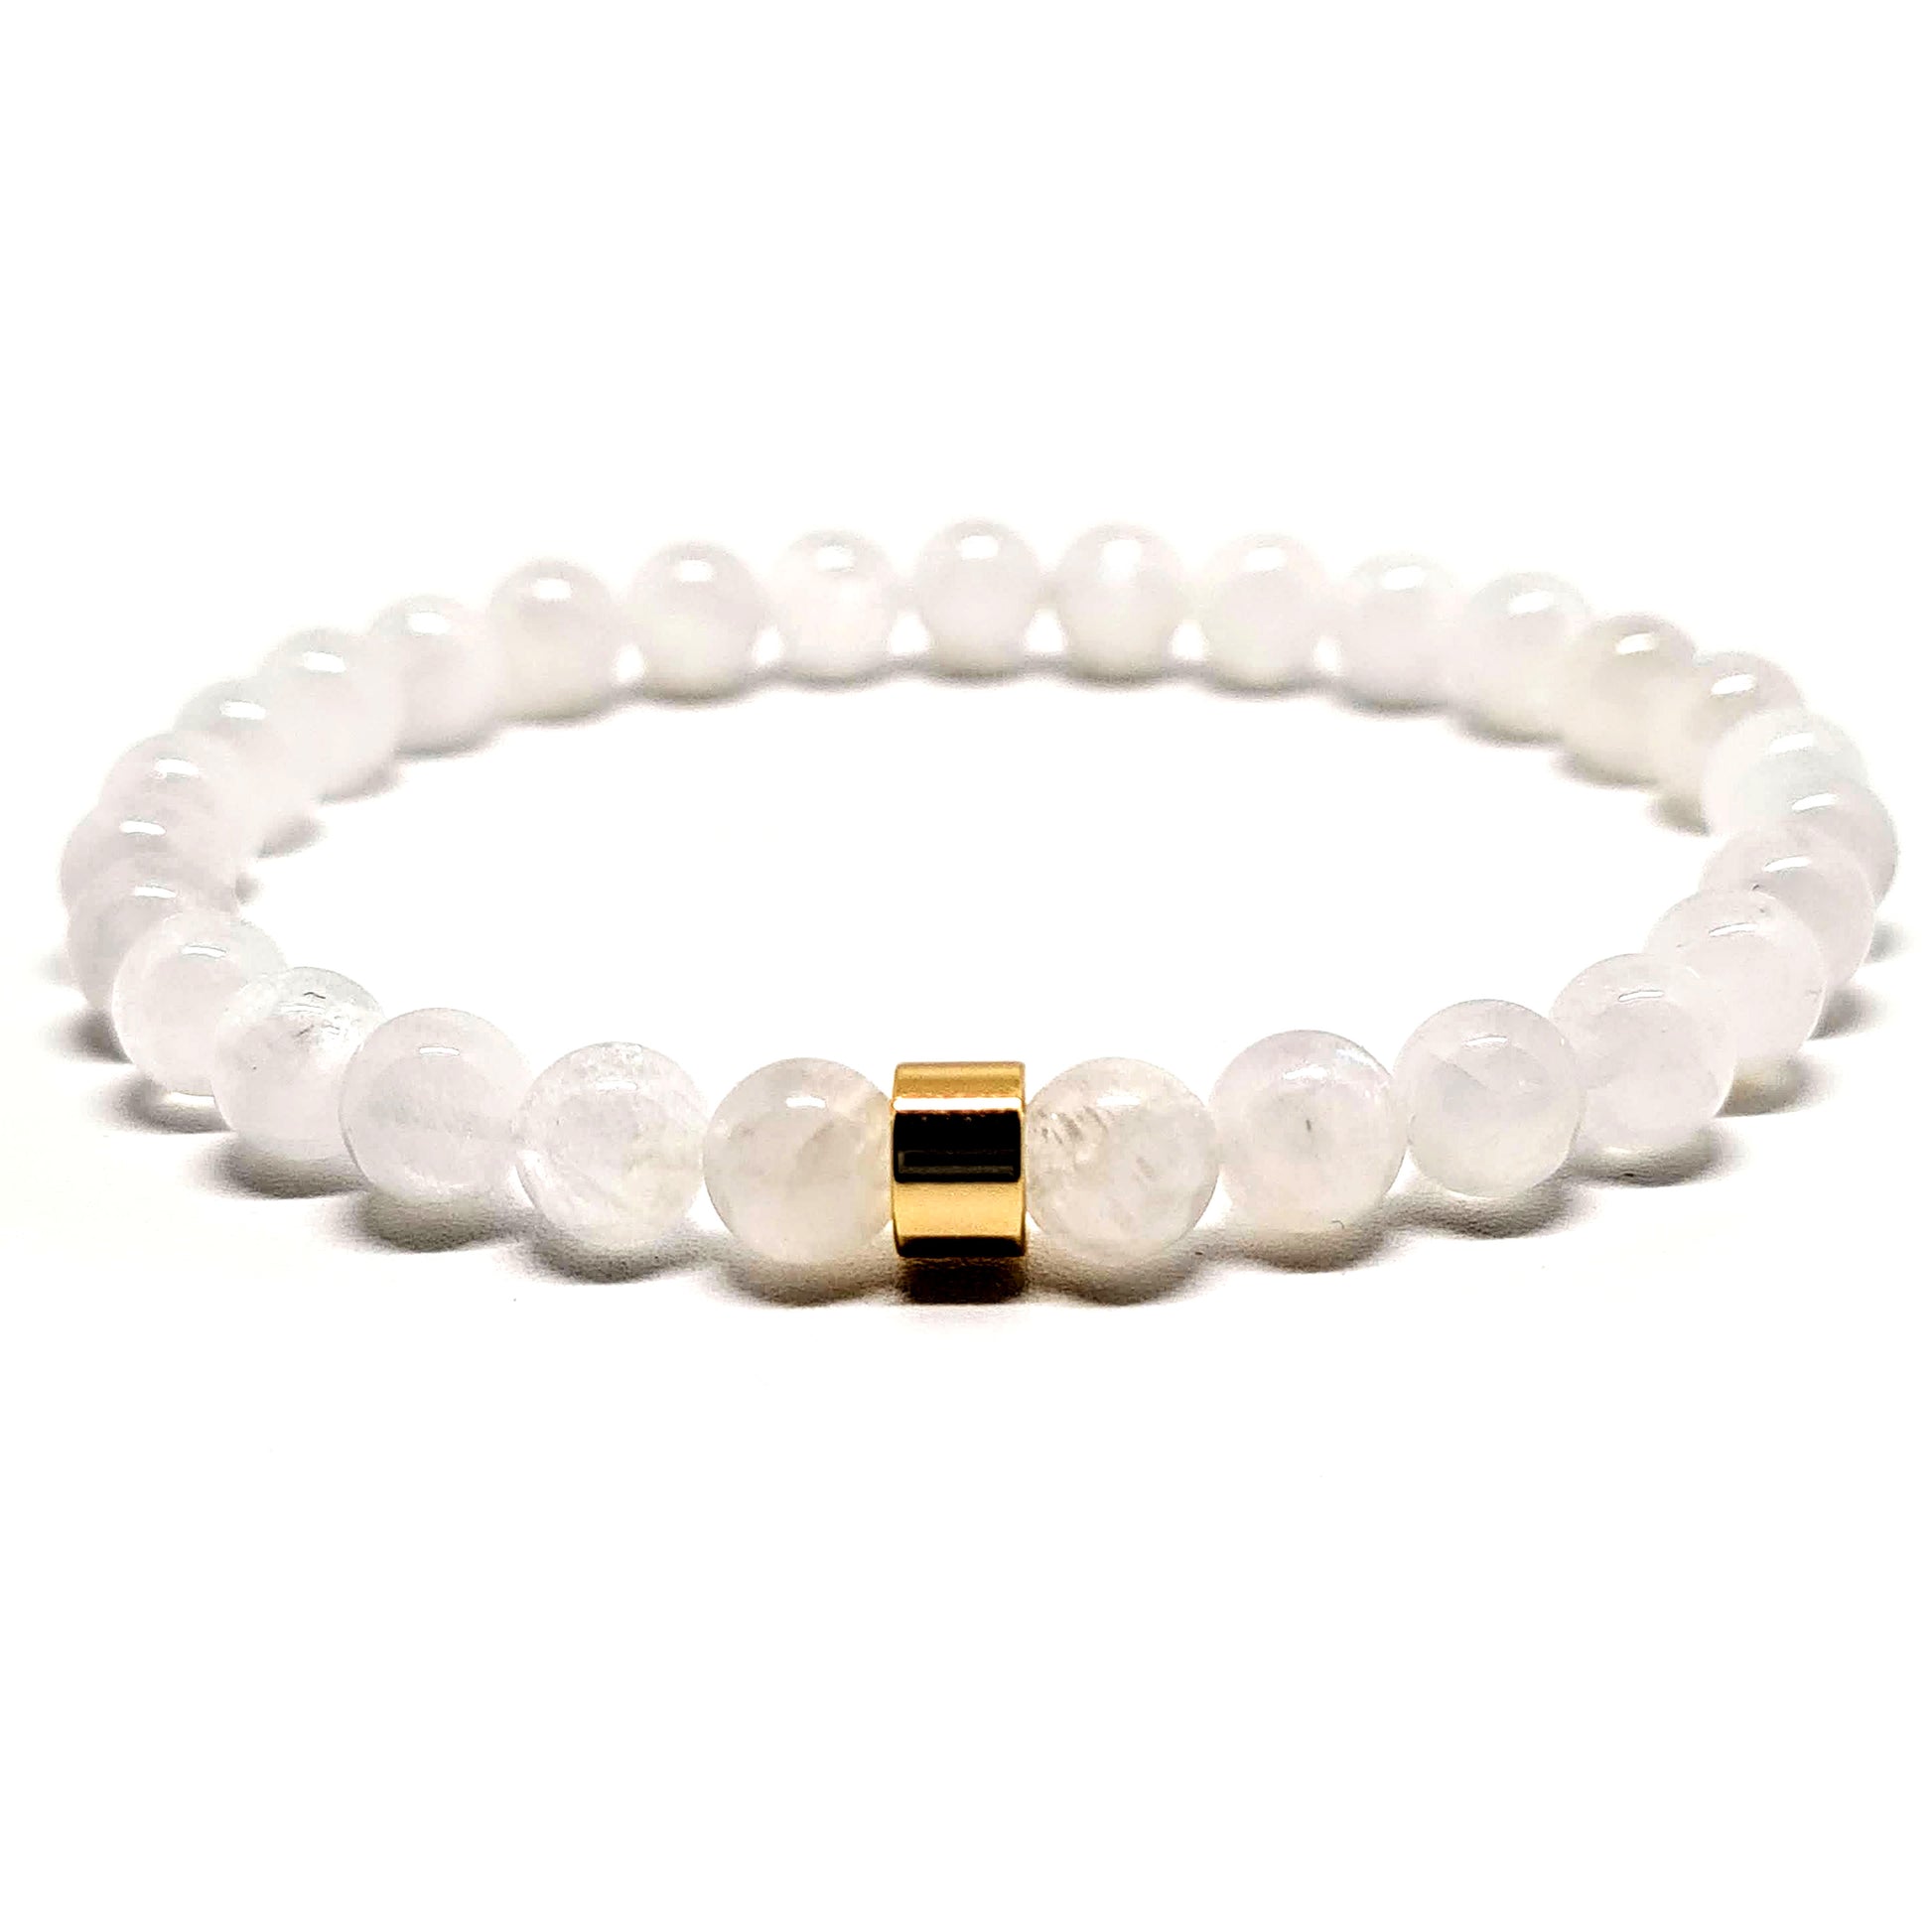 6mm Moonstone gemstone bracelet with 18ct gold plated accessory